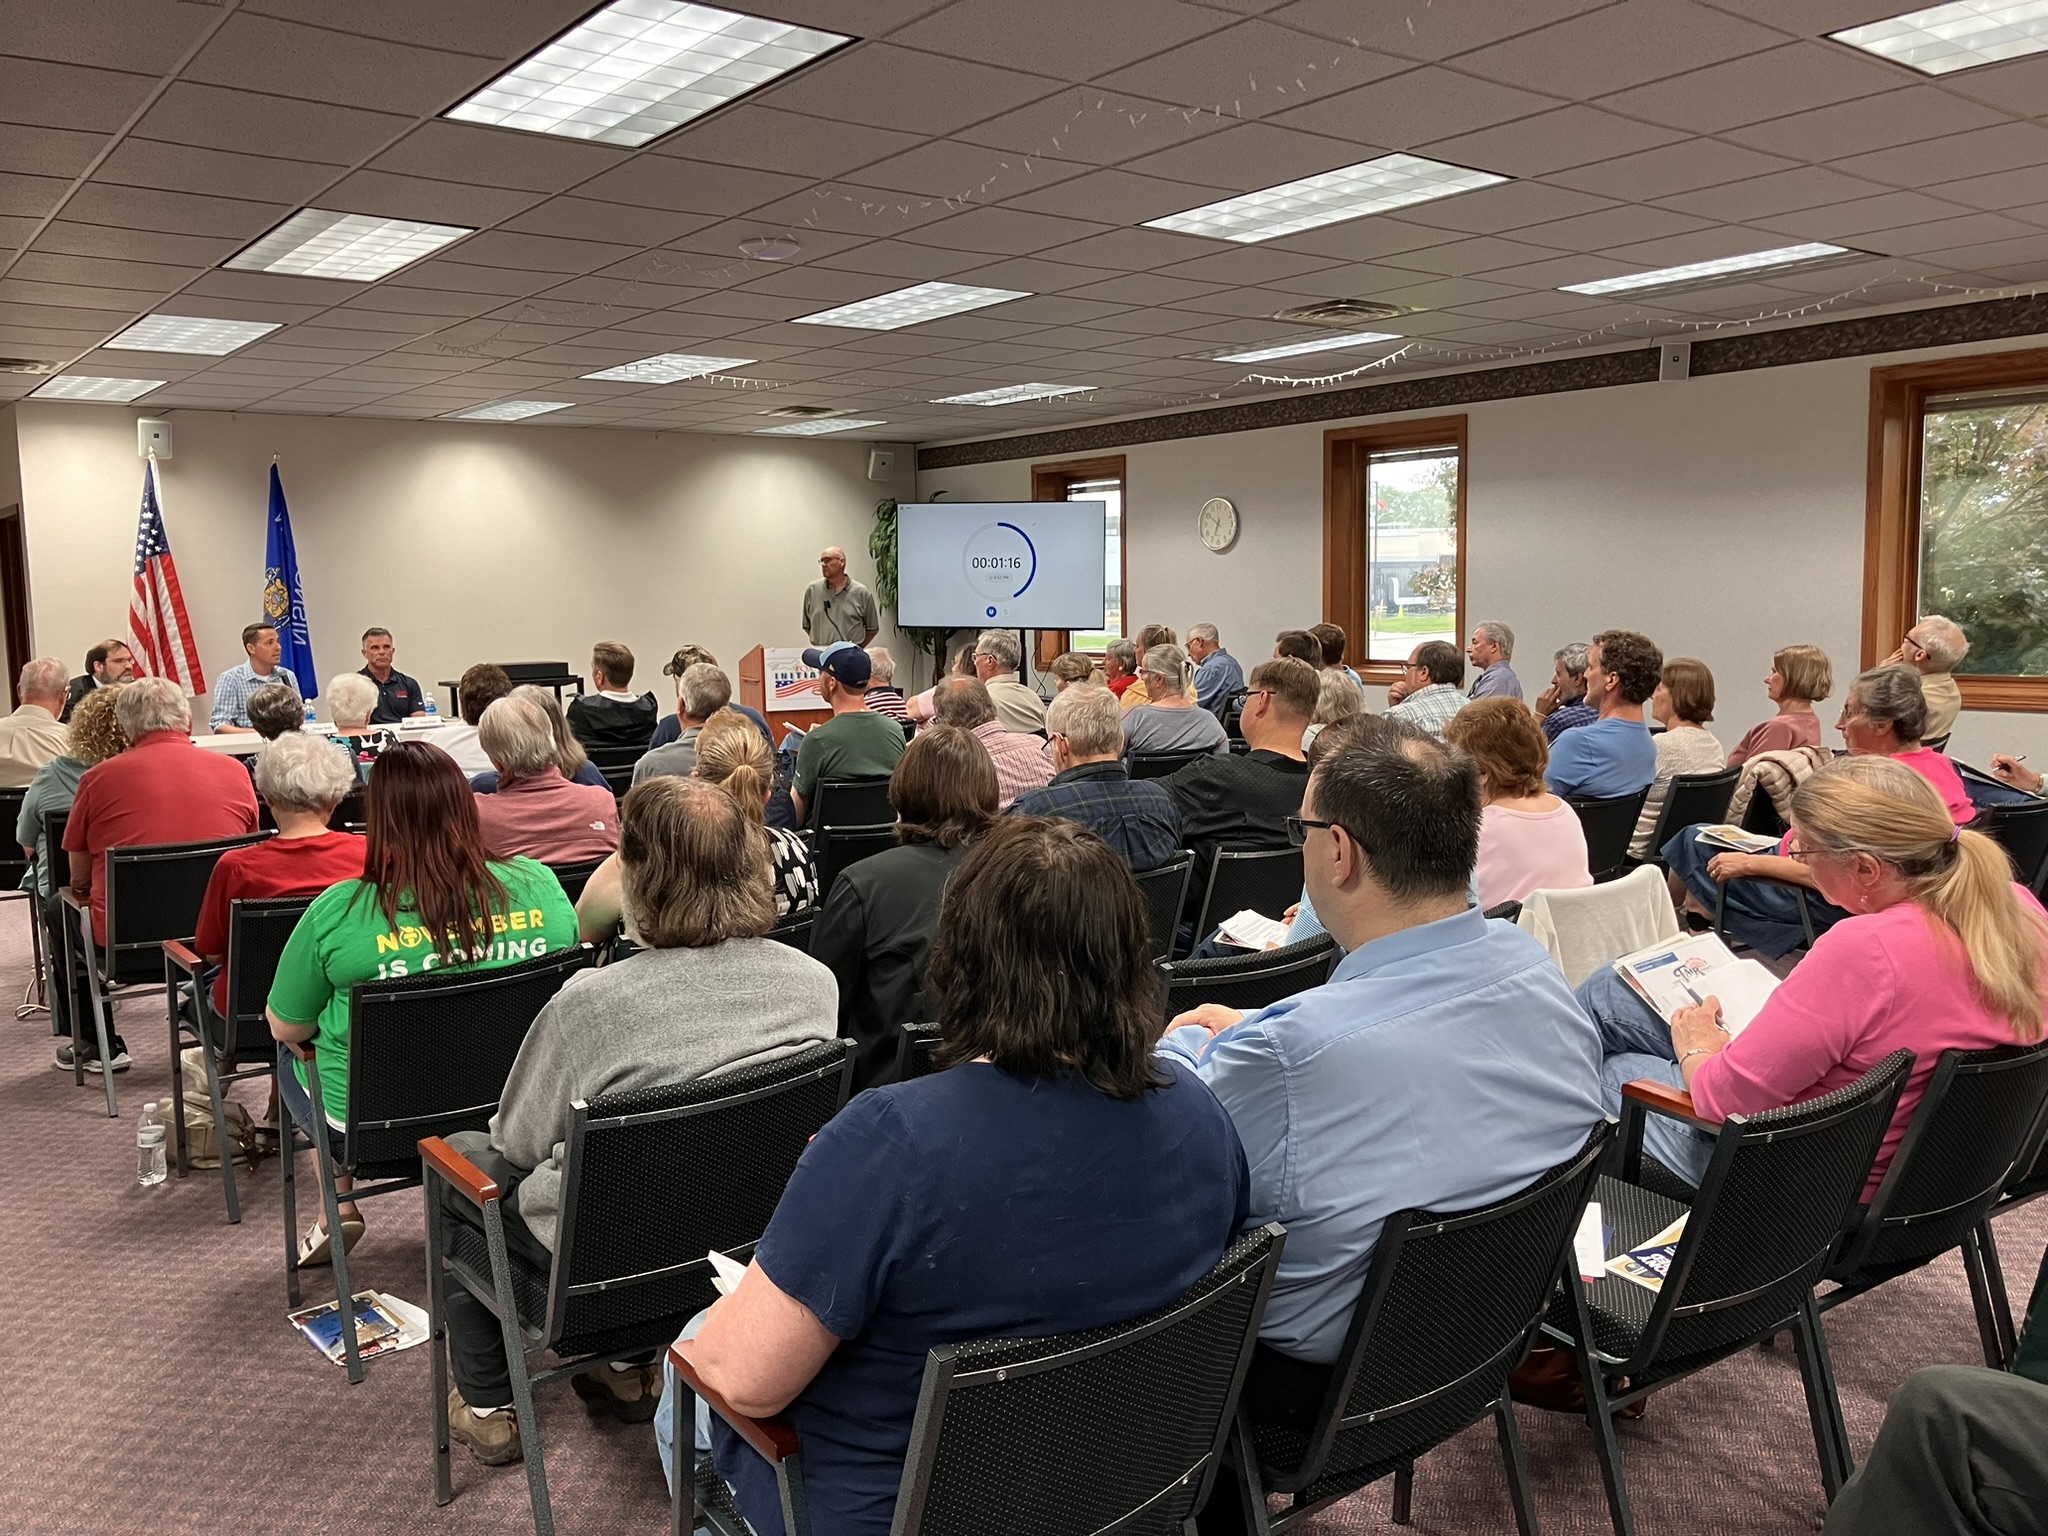 Some 80 people attended the 8th Congressional District candidate forum hosted by Fox Valley Initiative.